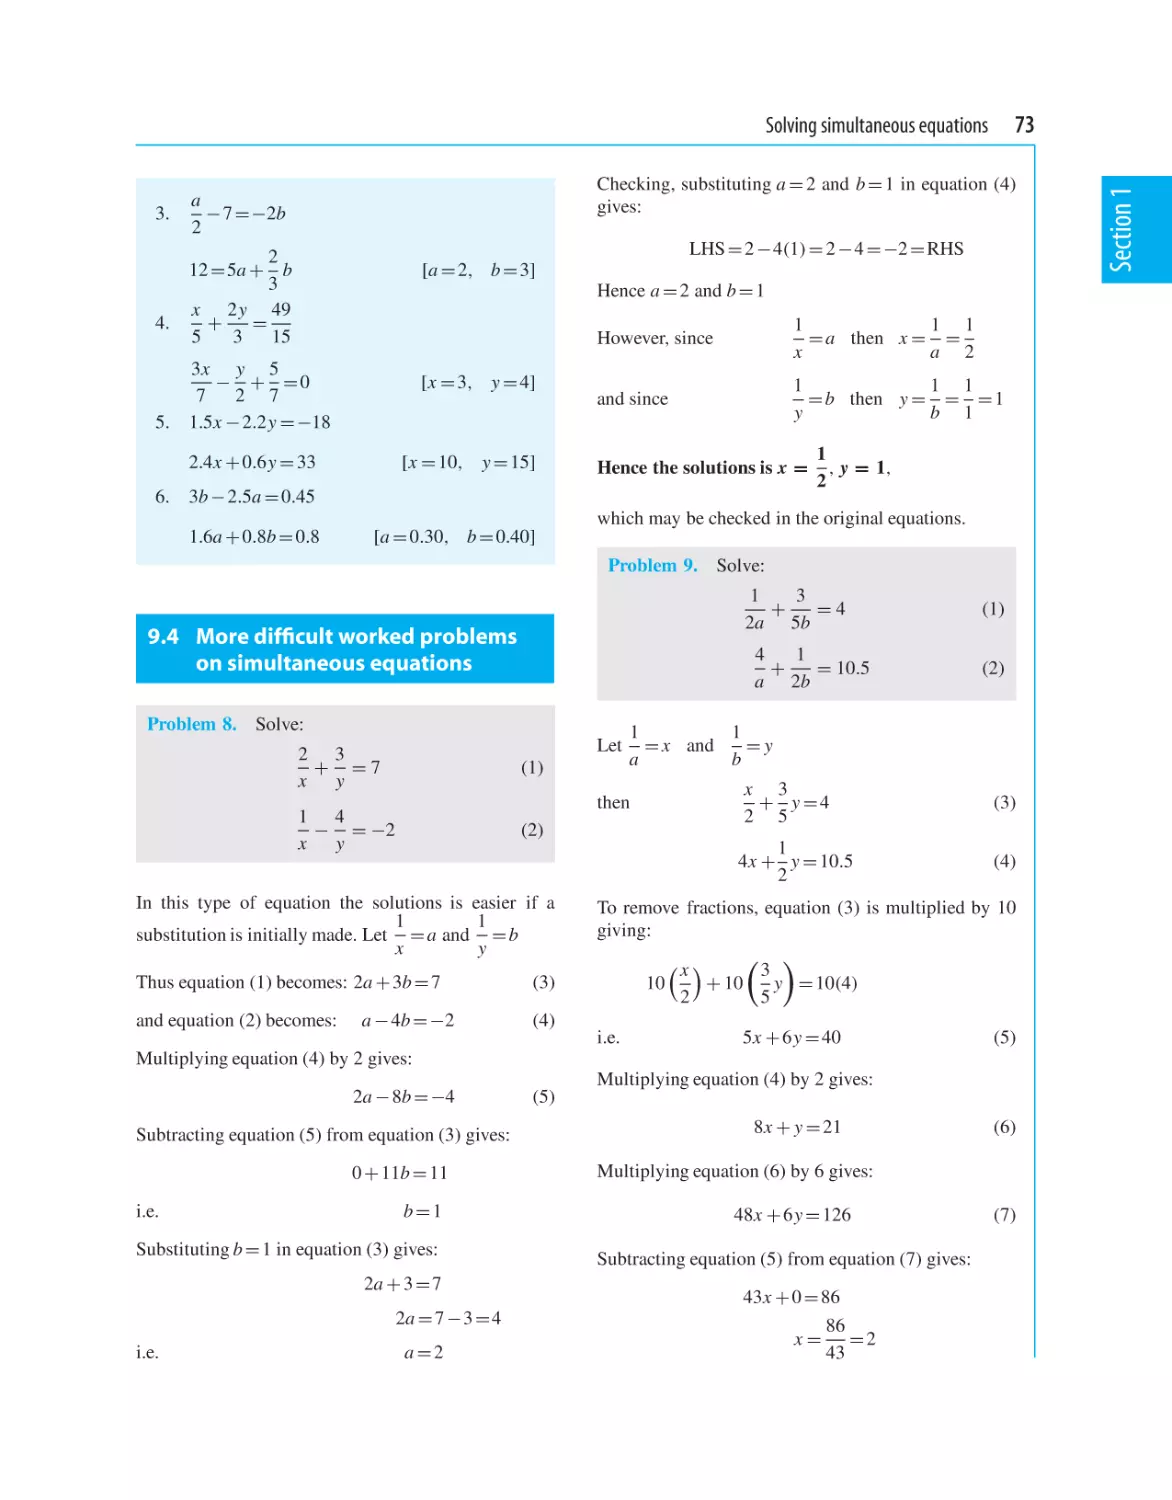 9.4 More difficult worked problems on simultaneous equations